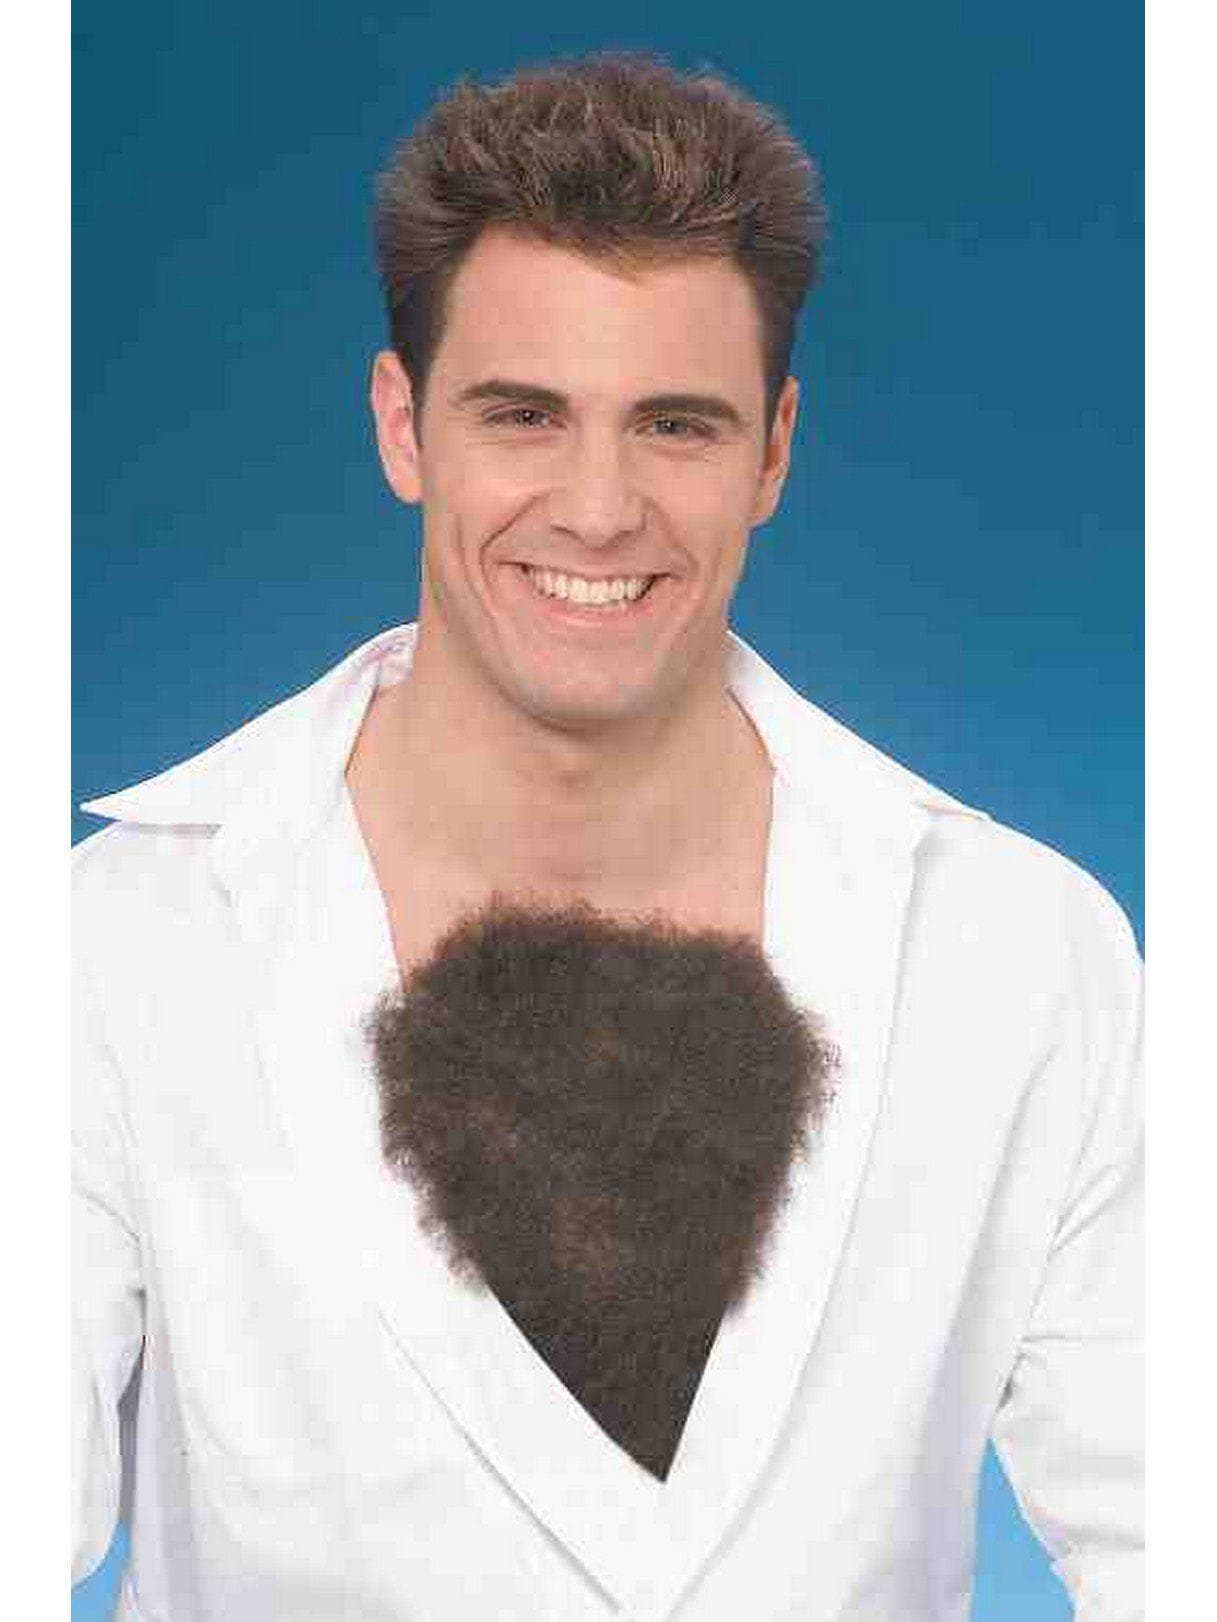 Hairy Chest Accessory - costumes.com